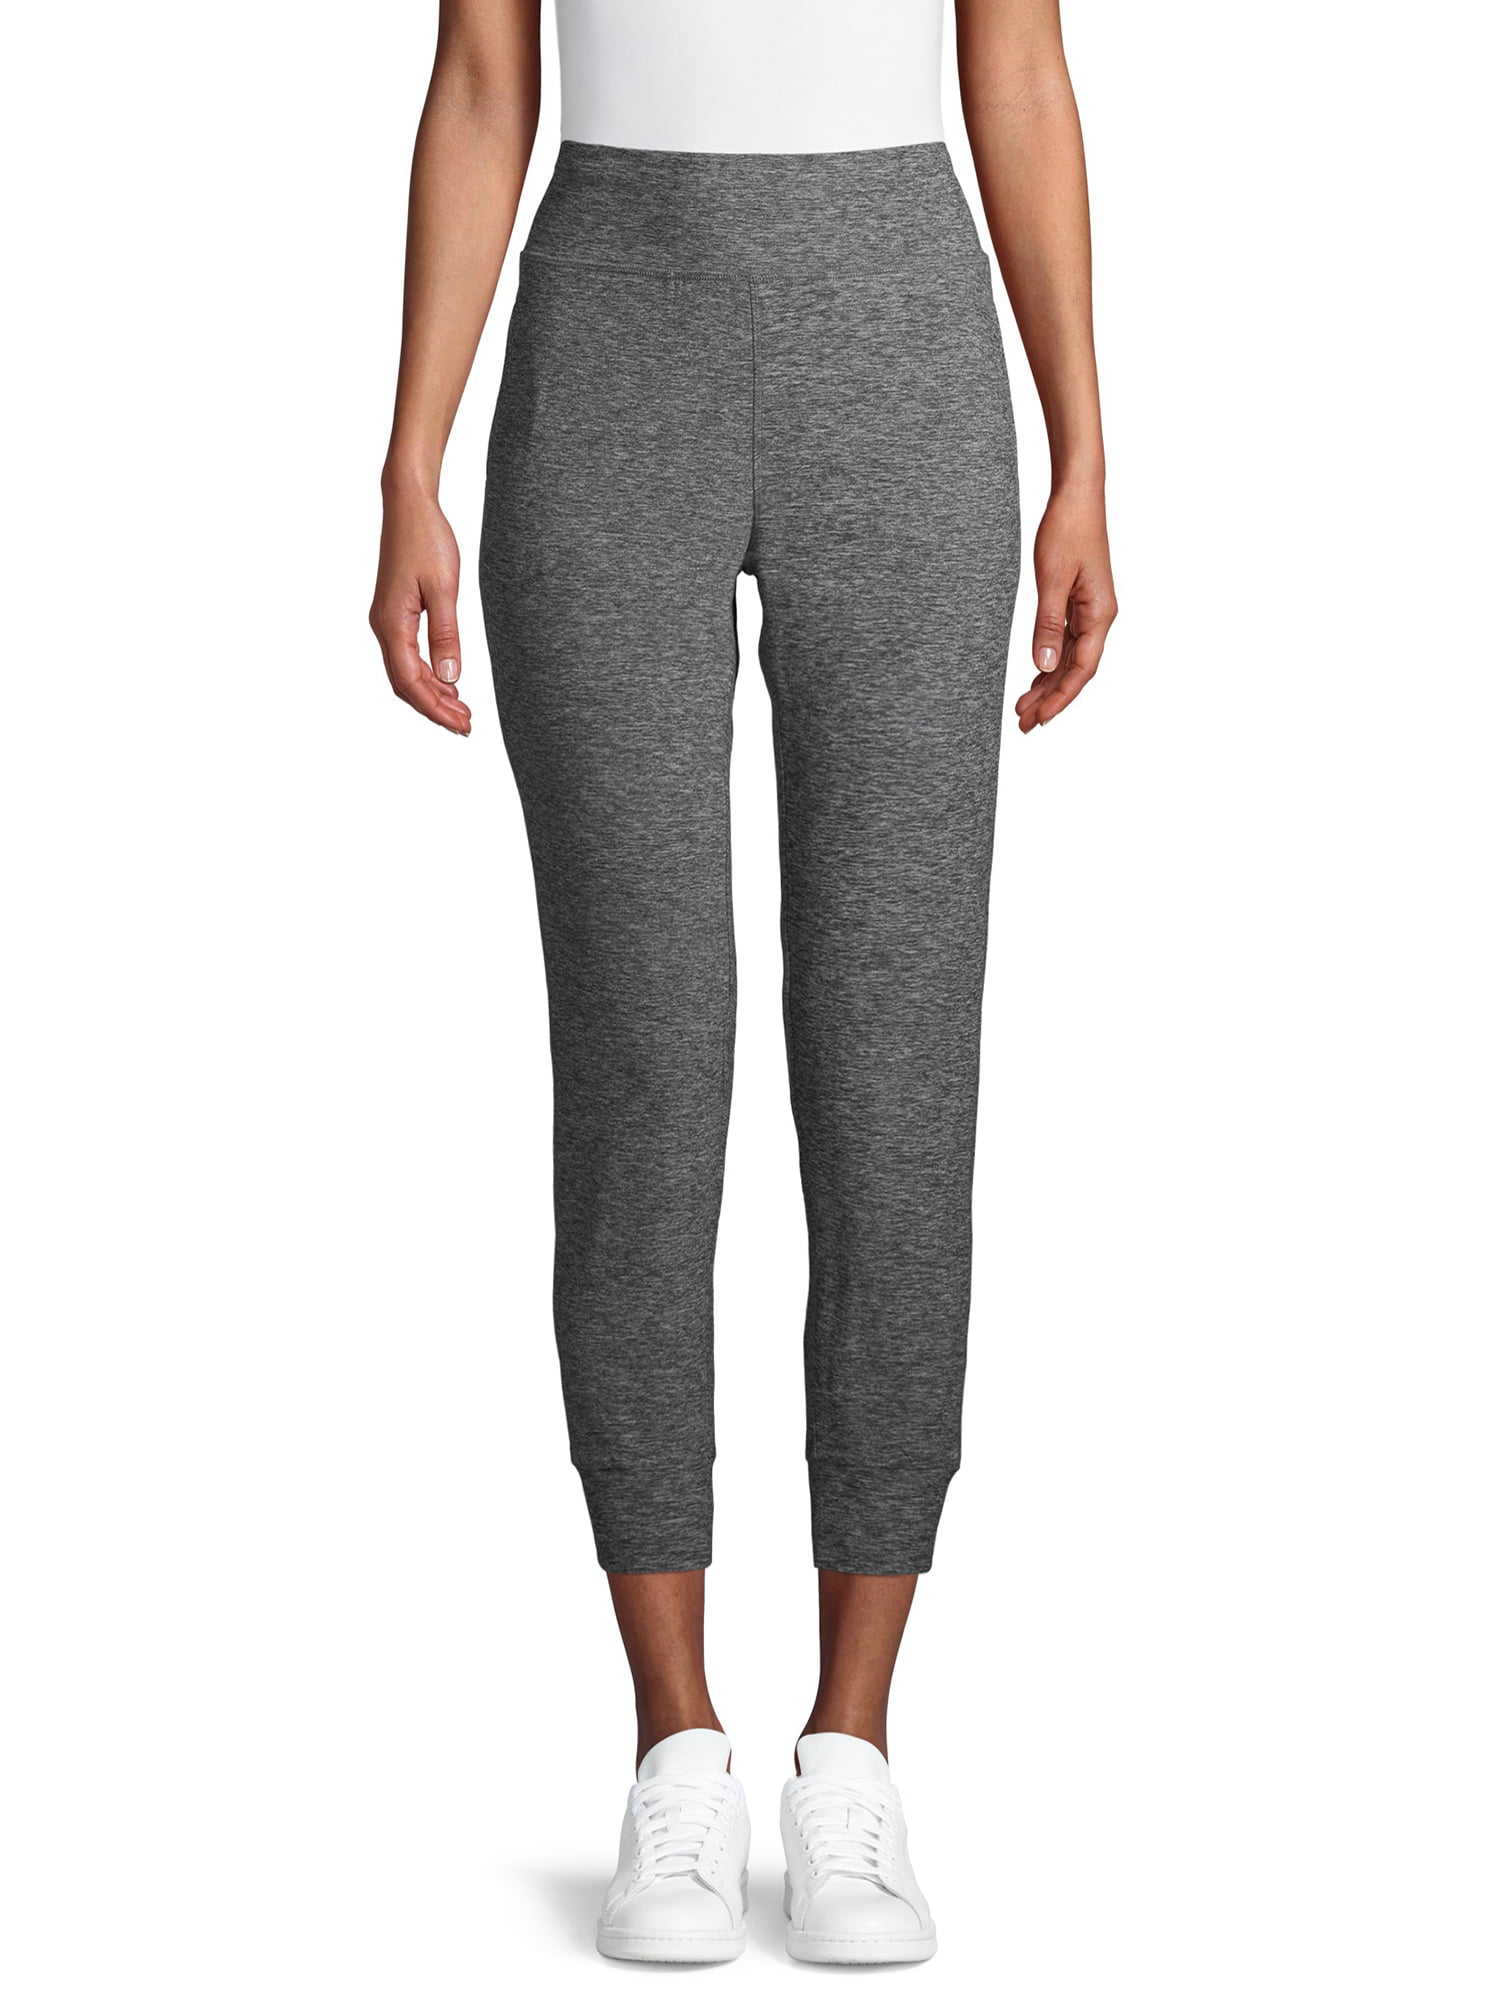 QUEENIEKE Women Sweatpants Running Workout Rib Cuff Jogger Pants with Pockets 19207